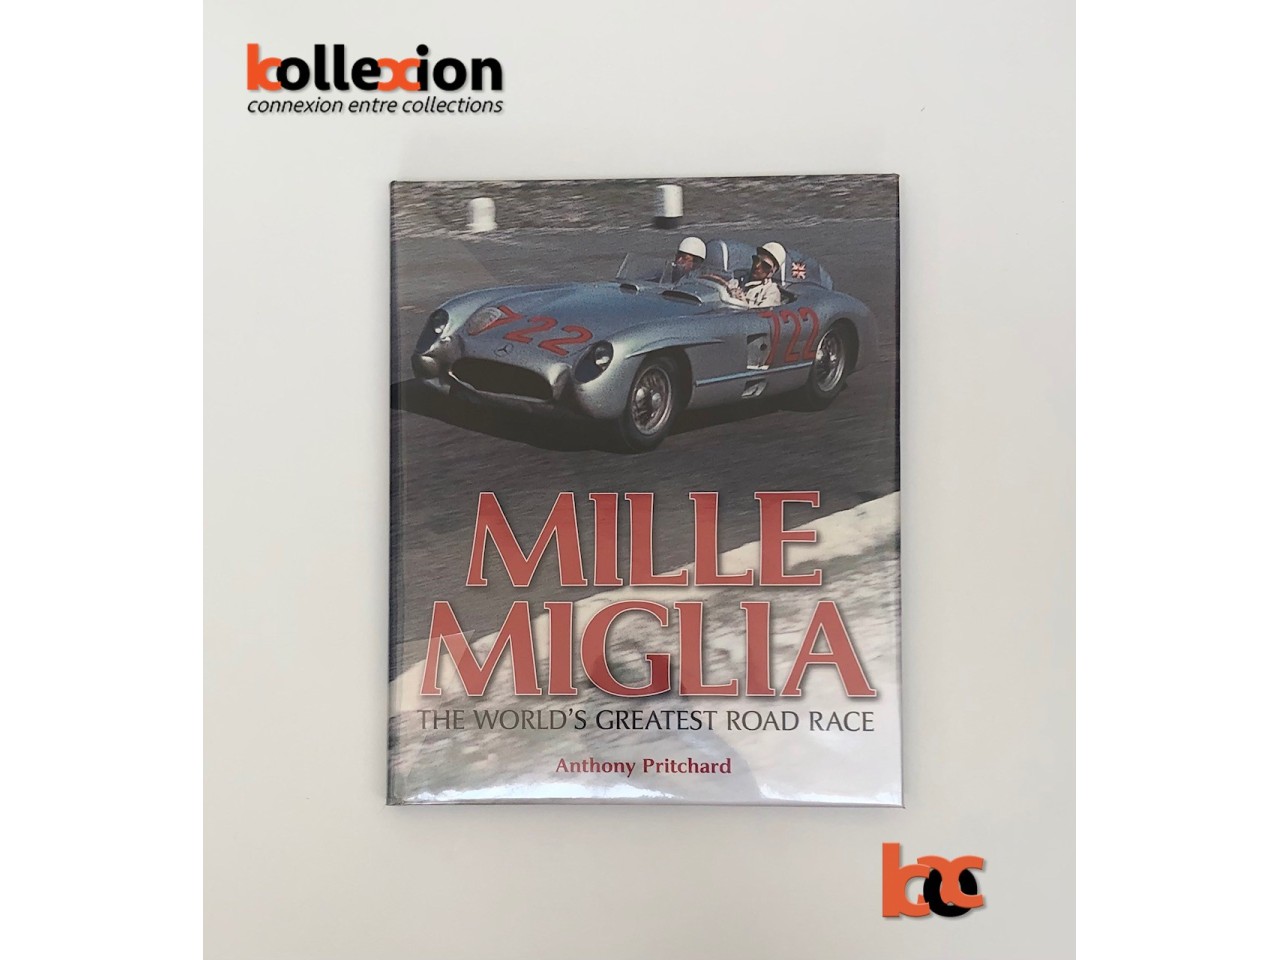 Livre Mille Miglia The World's Greatest Road Race, Anthony Pritchard, Haynes, anglais, TBE